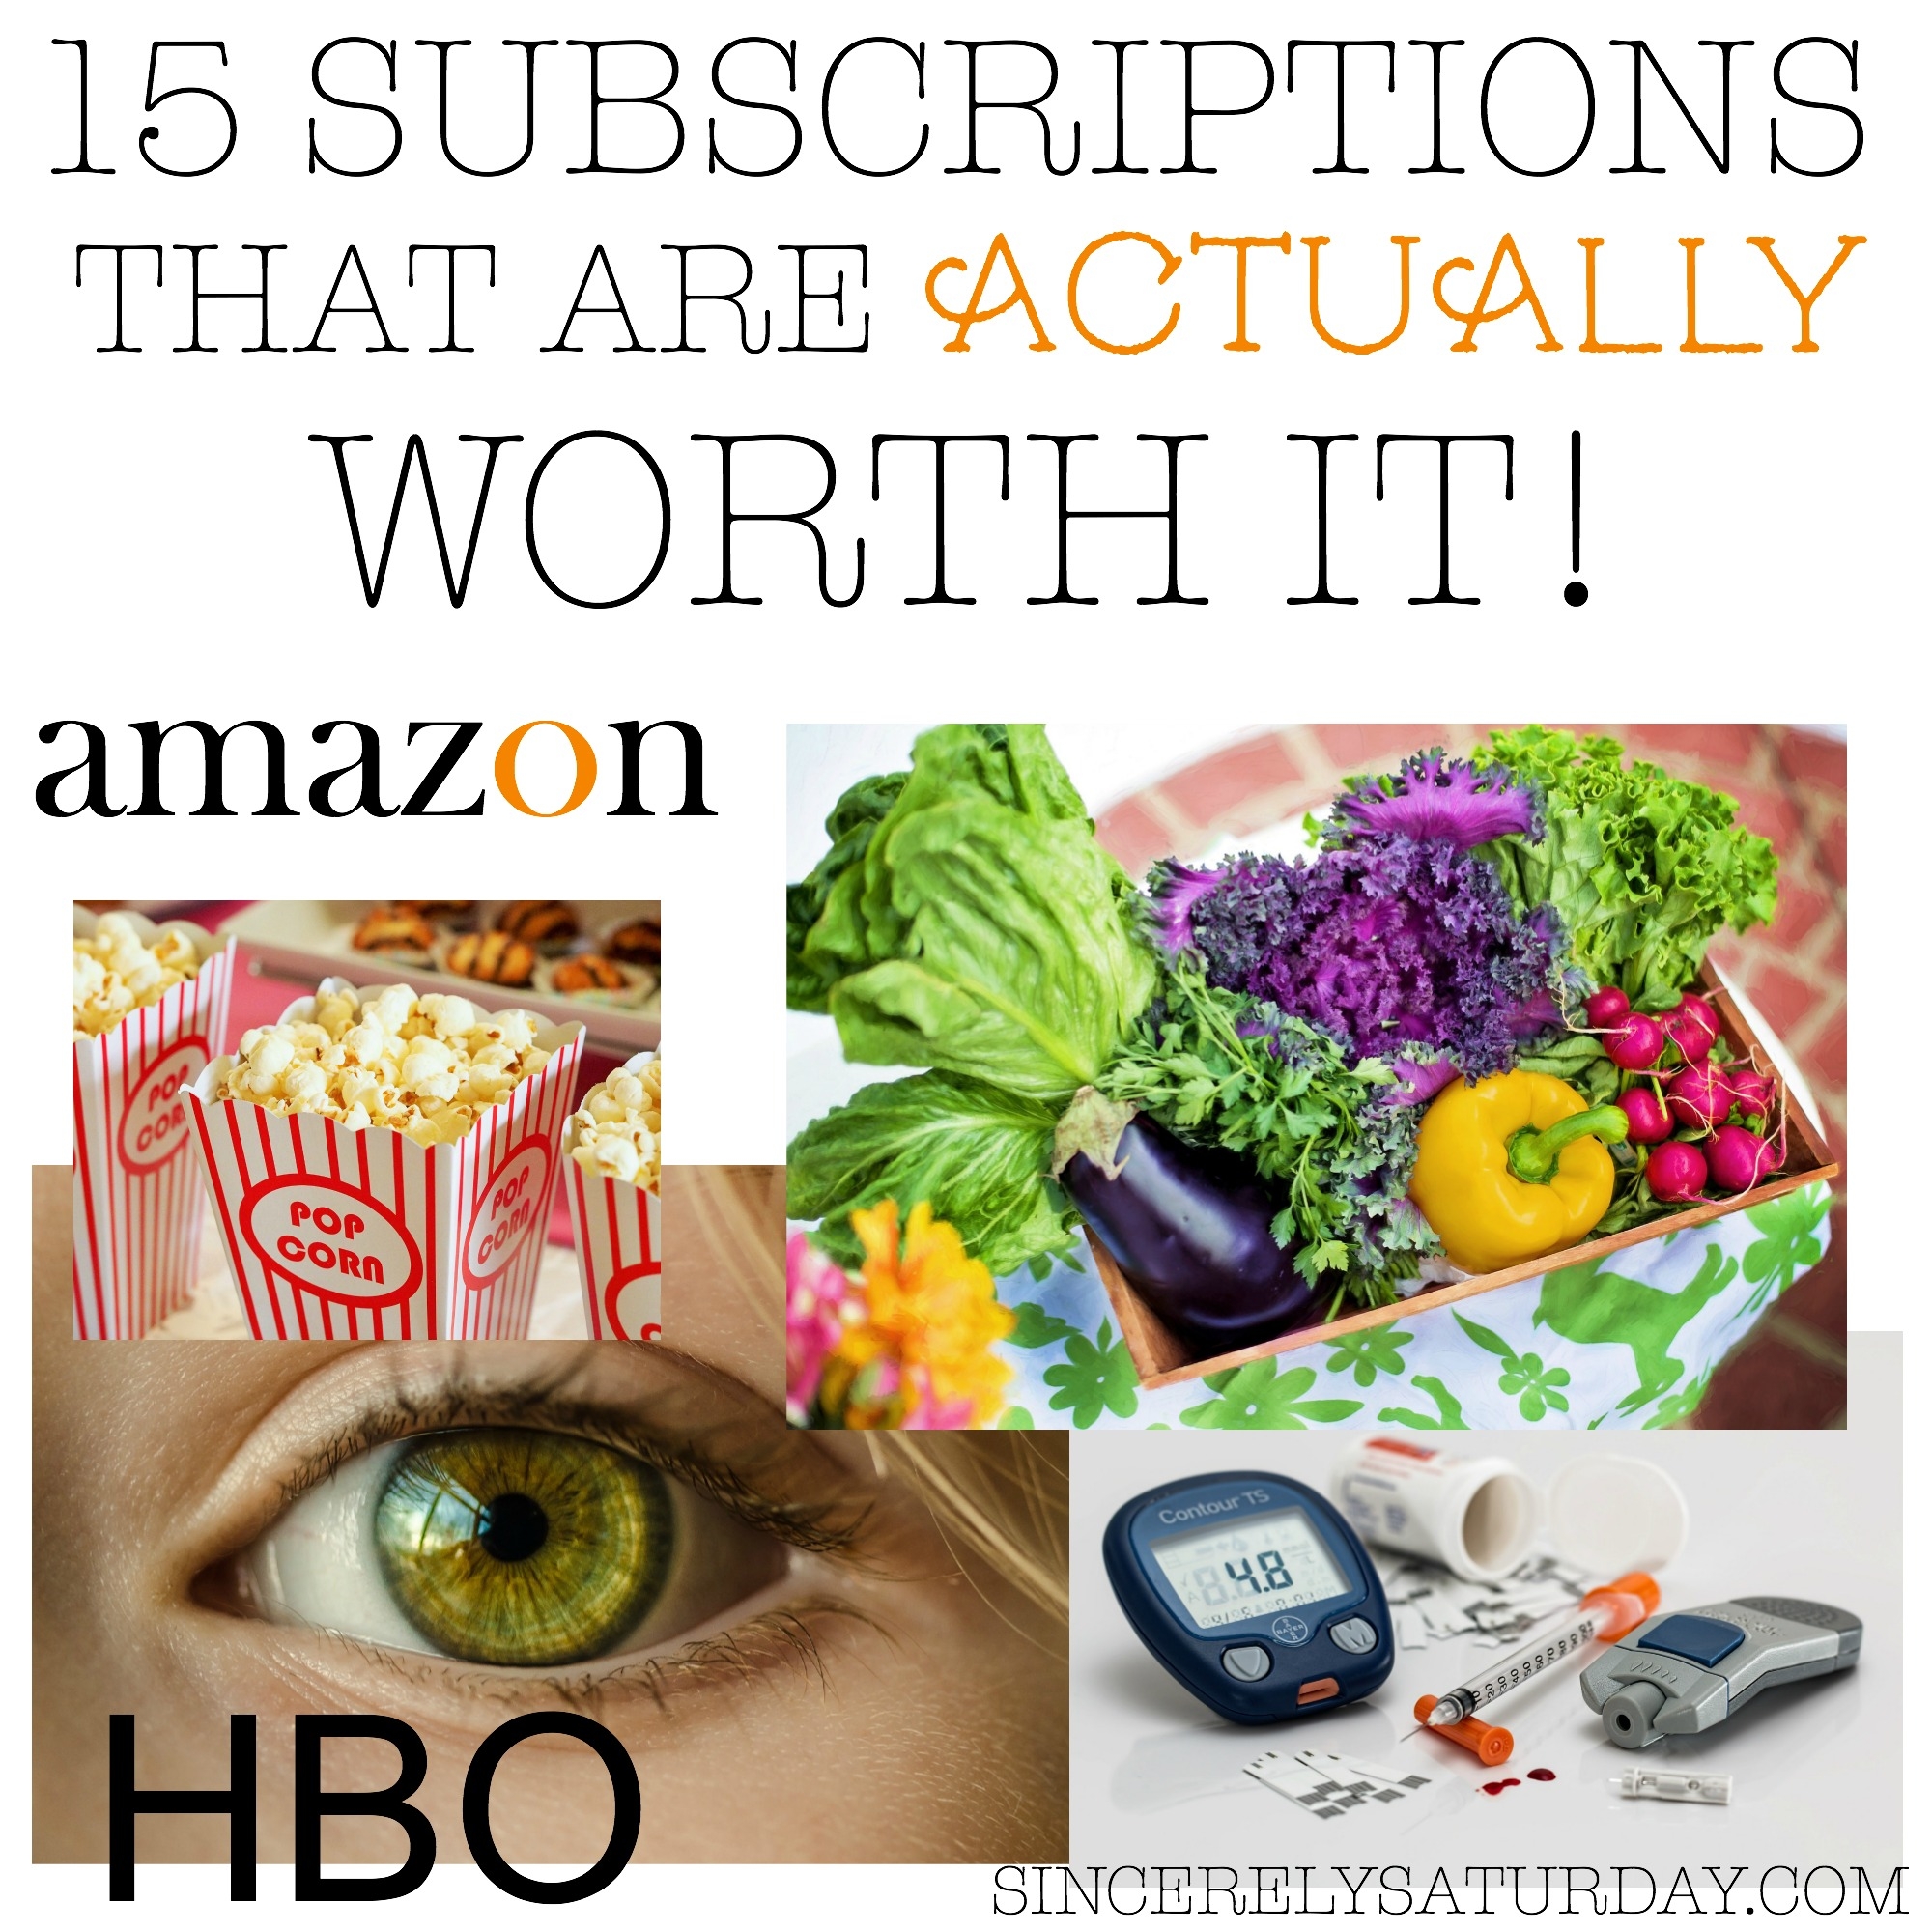 15 SUBSCRIPTIONS THAT ARE ACTUALLY WORTH IT!